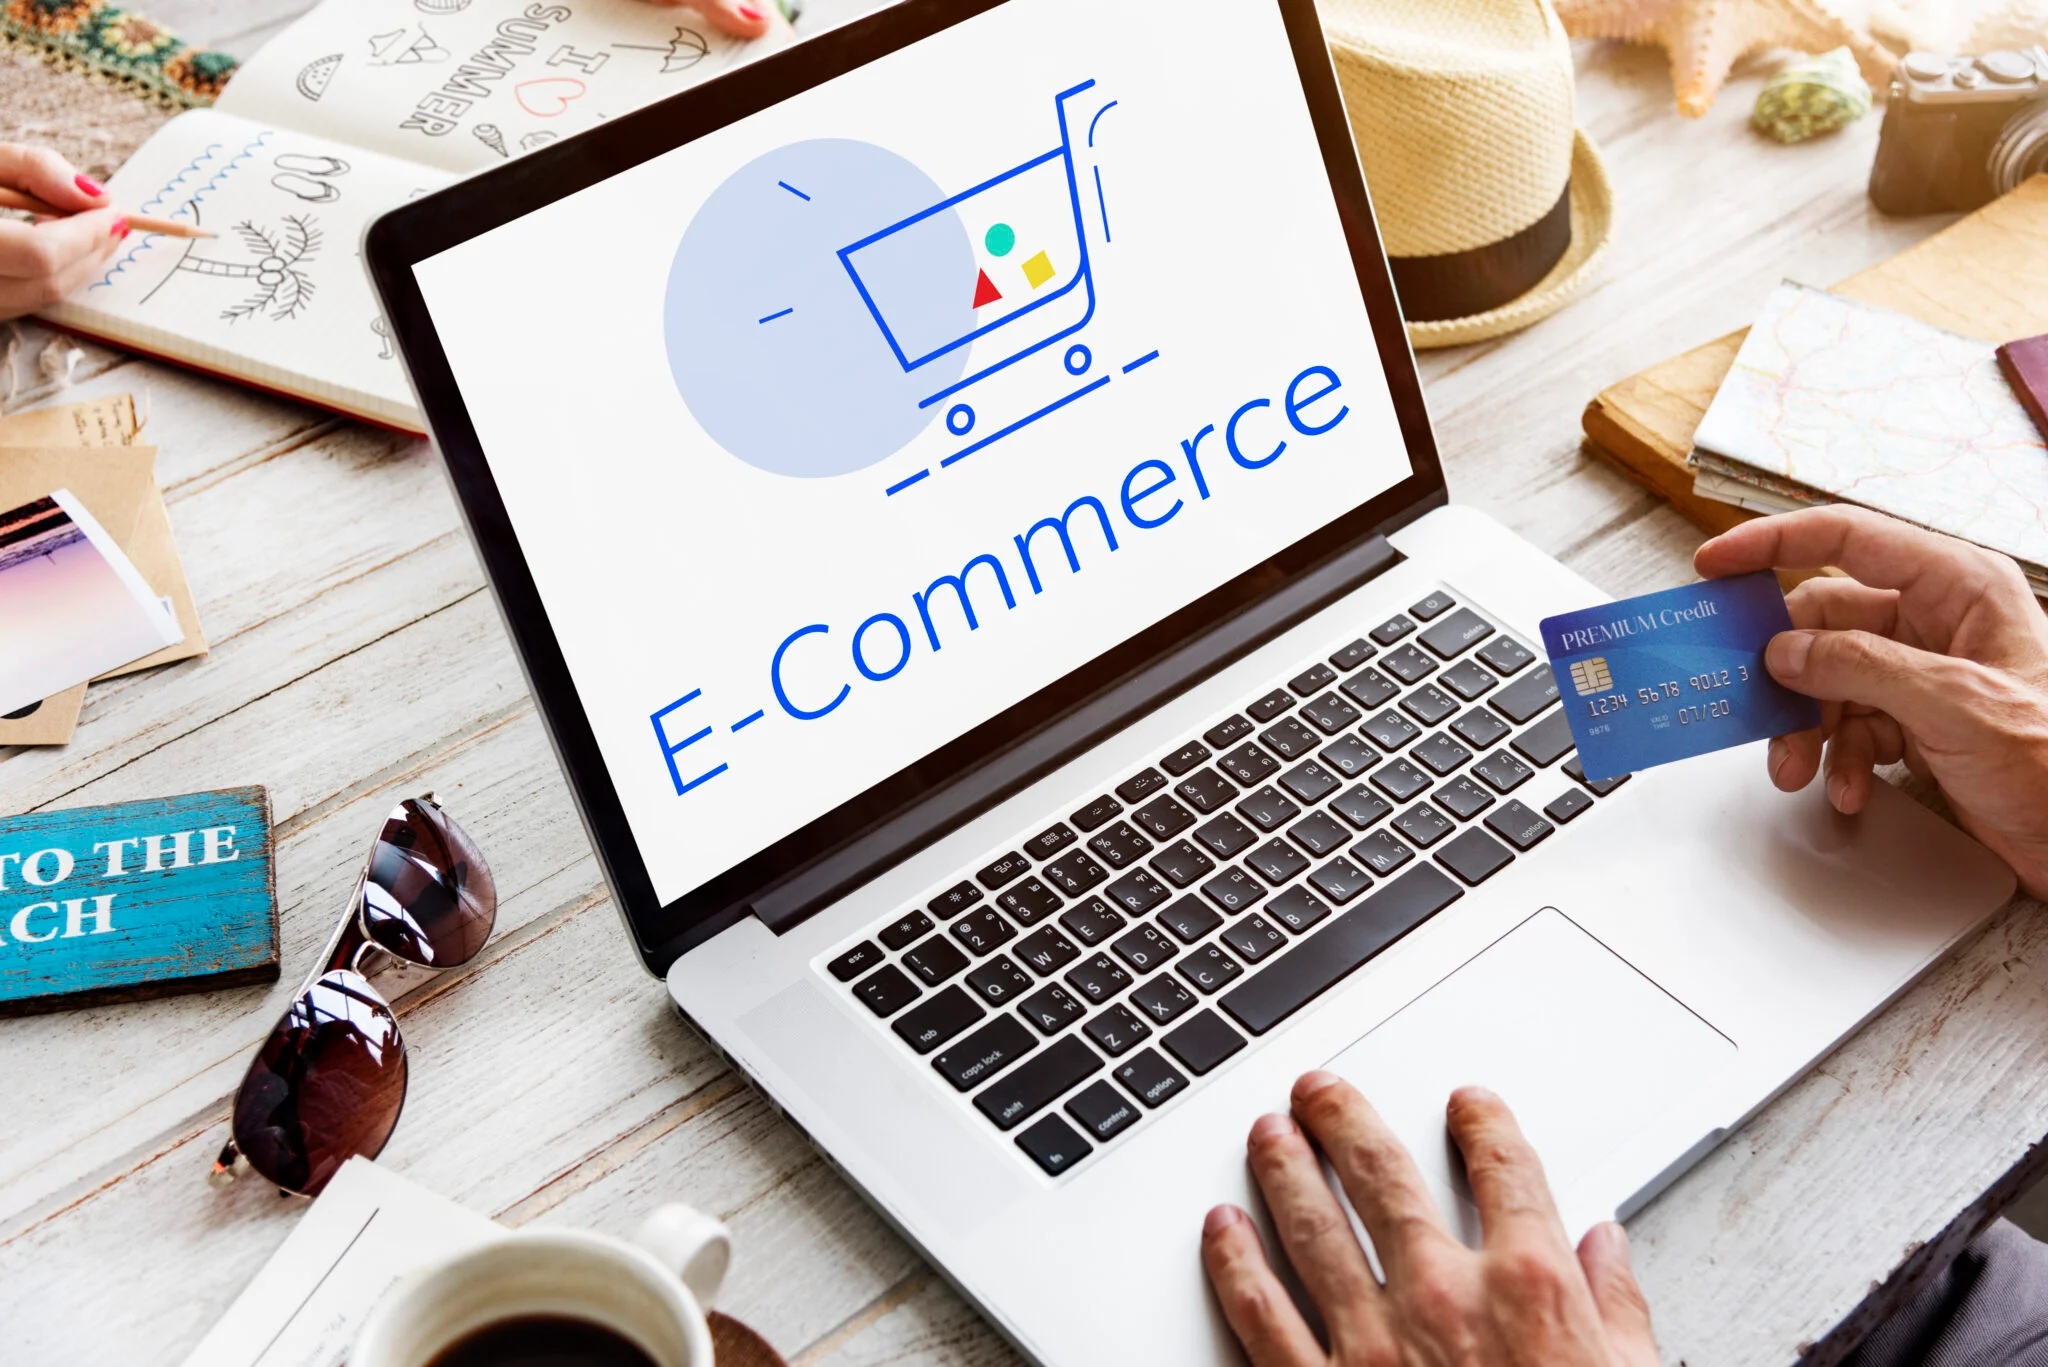 How to Build a Successful E-commerce Business from Scratch